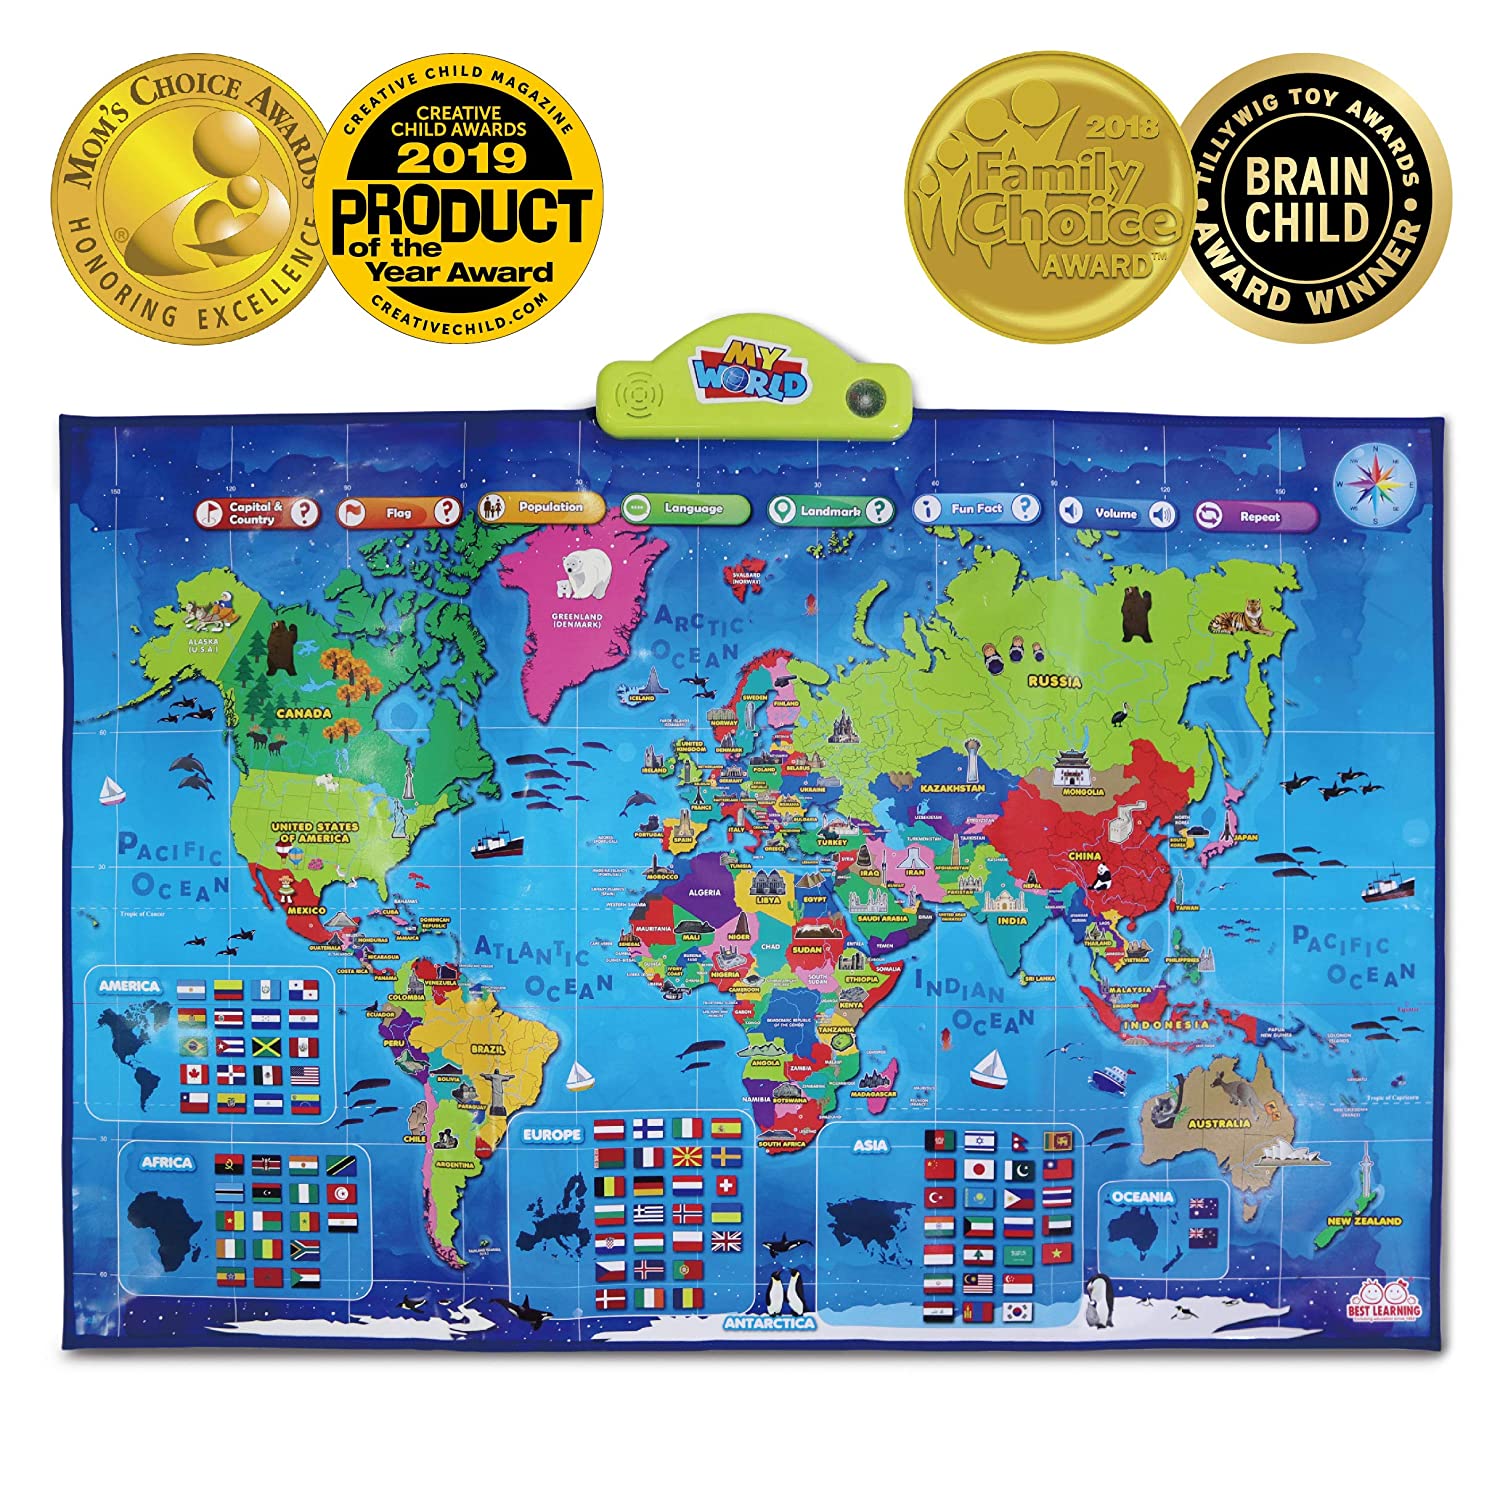 10 Best World Map for Kids 2022 - Buying Guide & Reviews 3